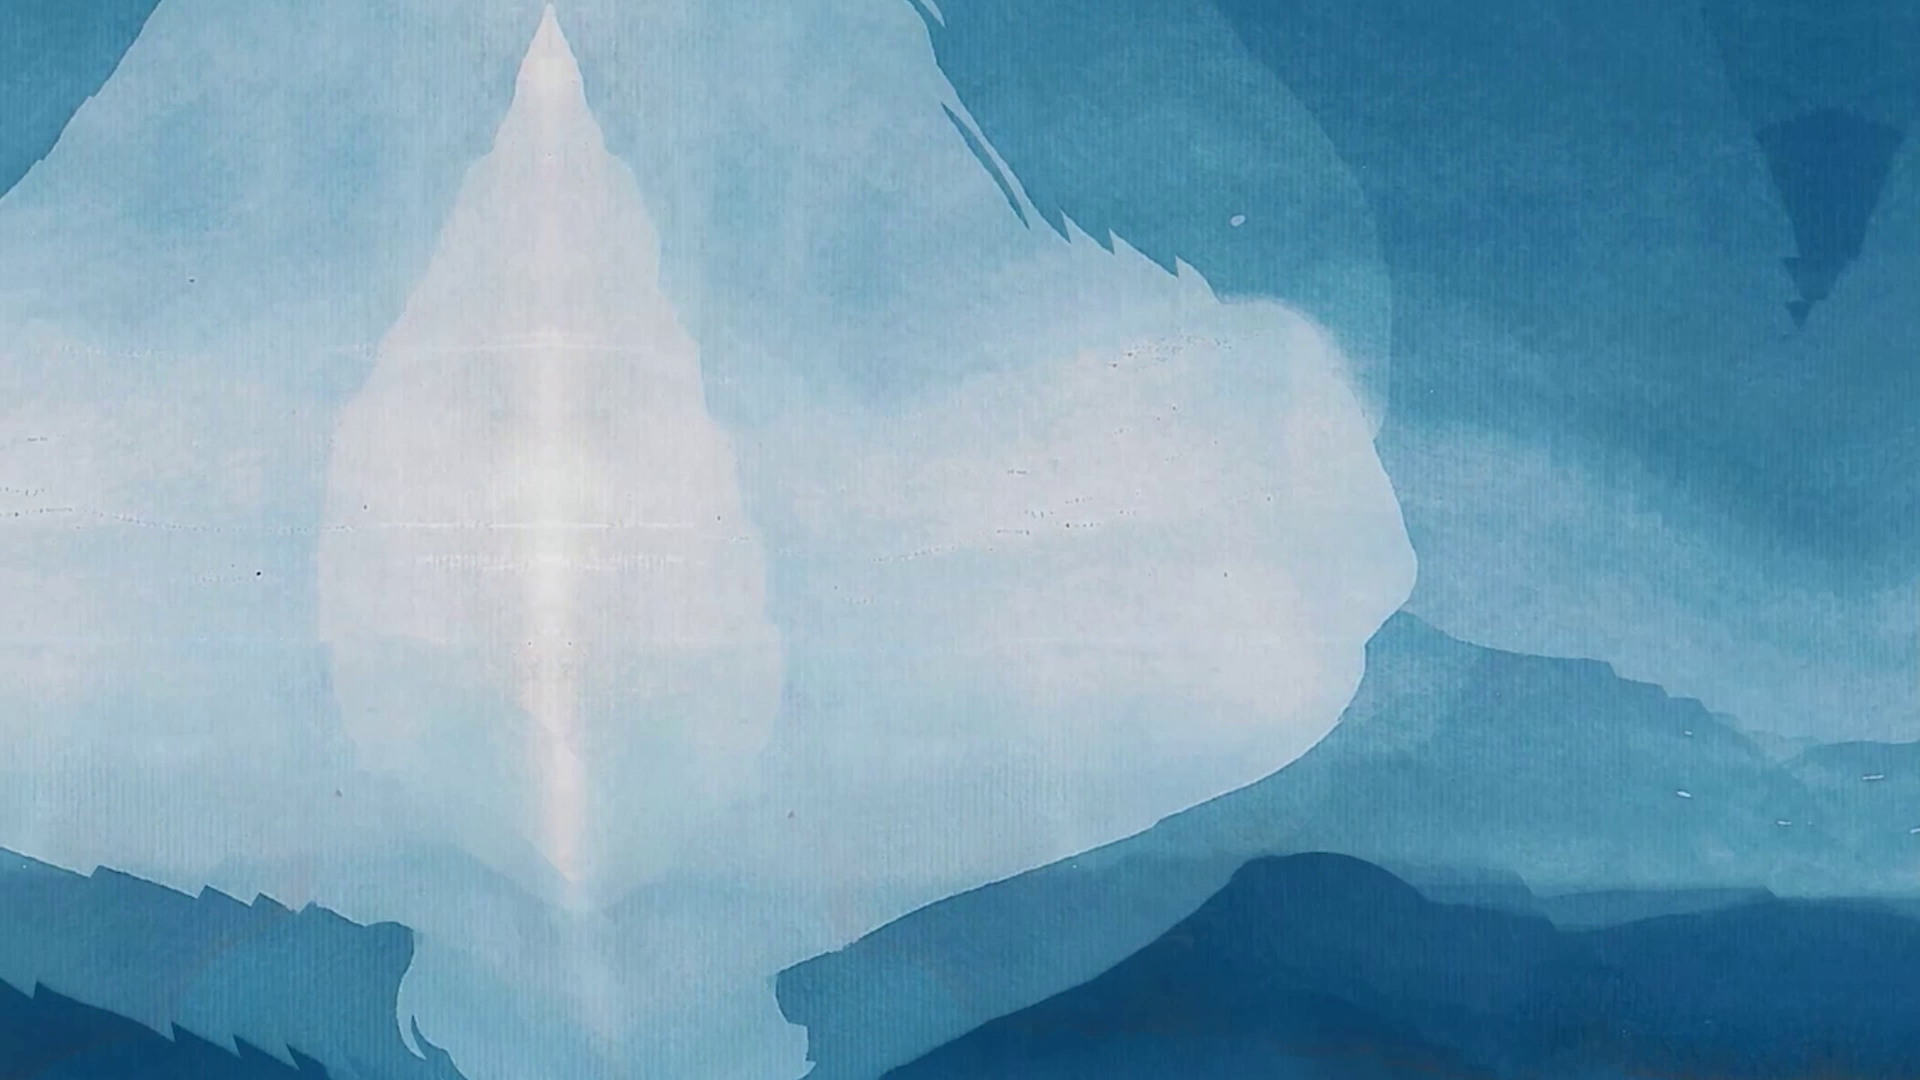 A still from Jessica El Mal's work 'The Water We Seek', showing an abstract blue pattern.